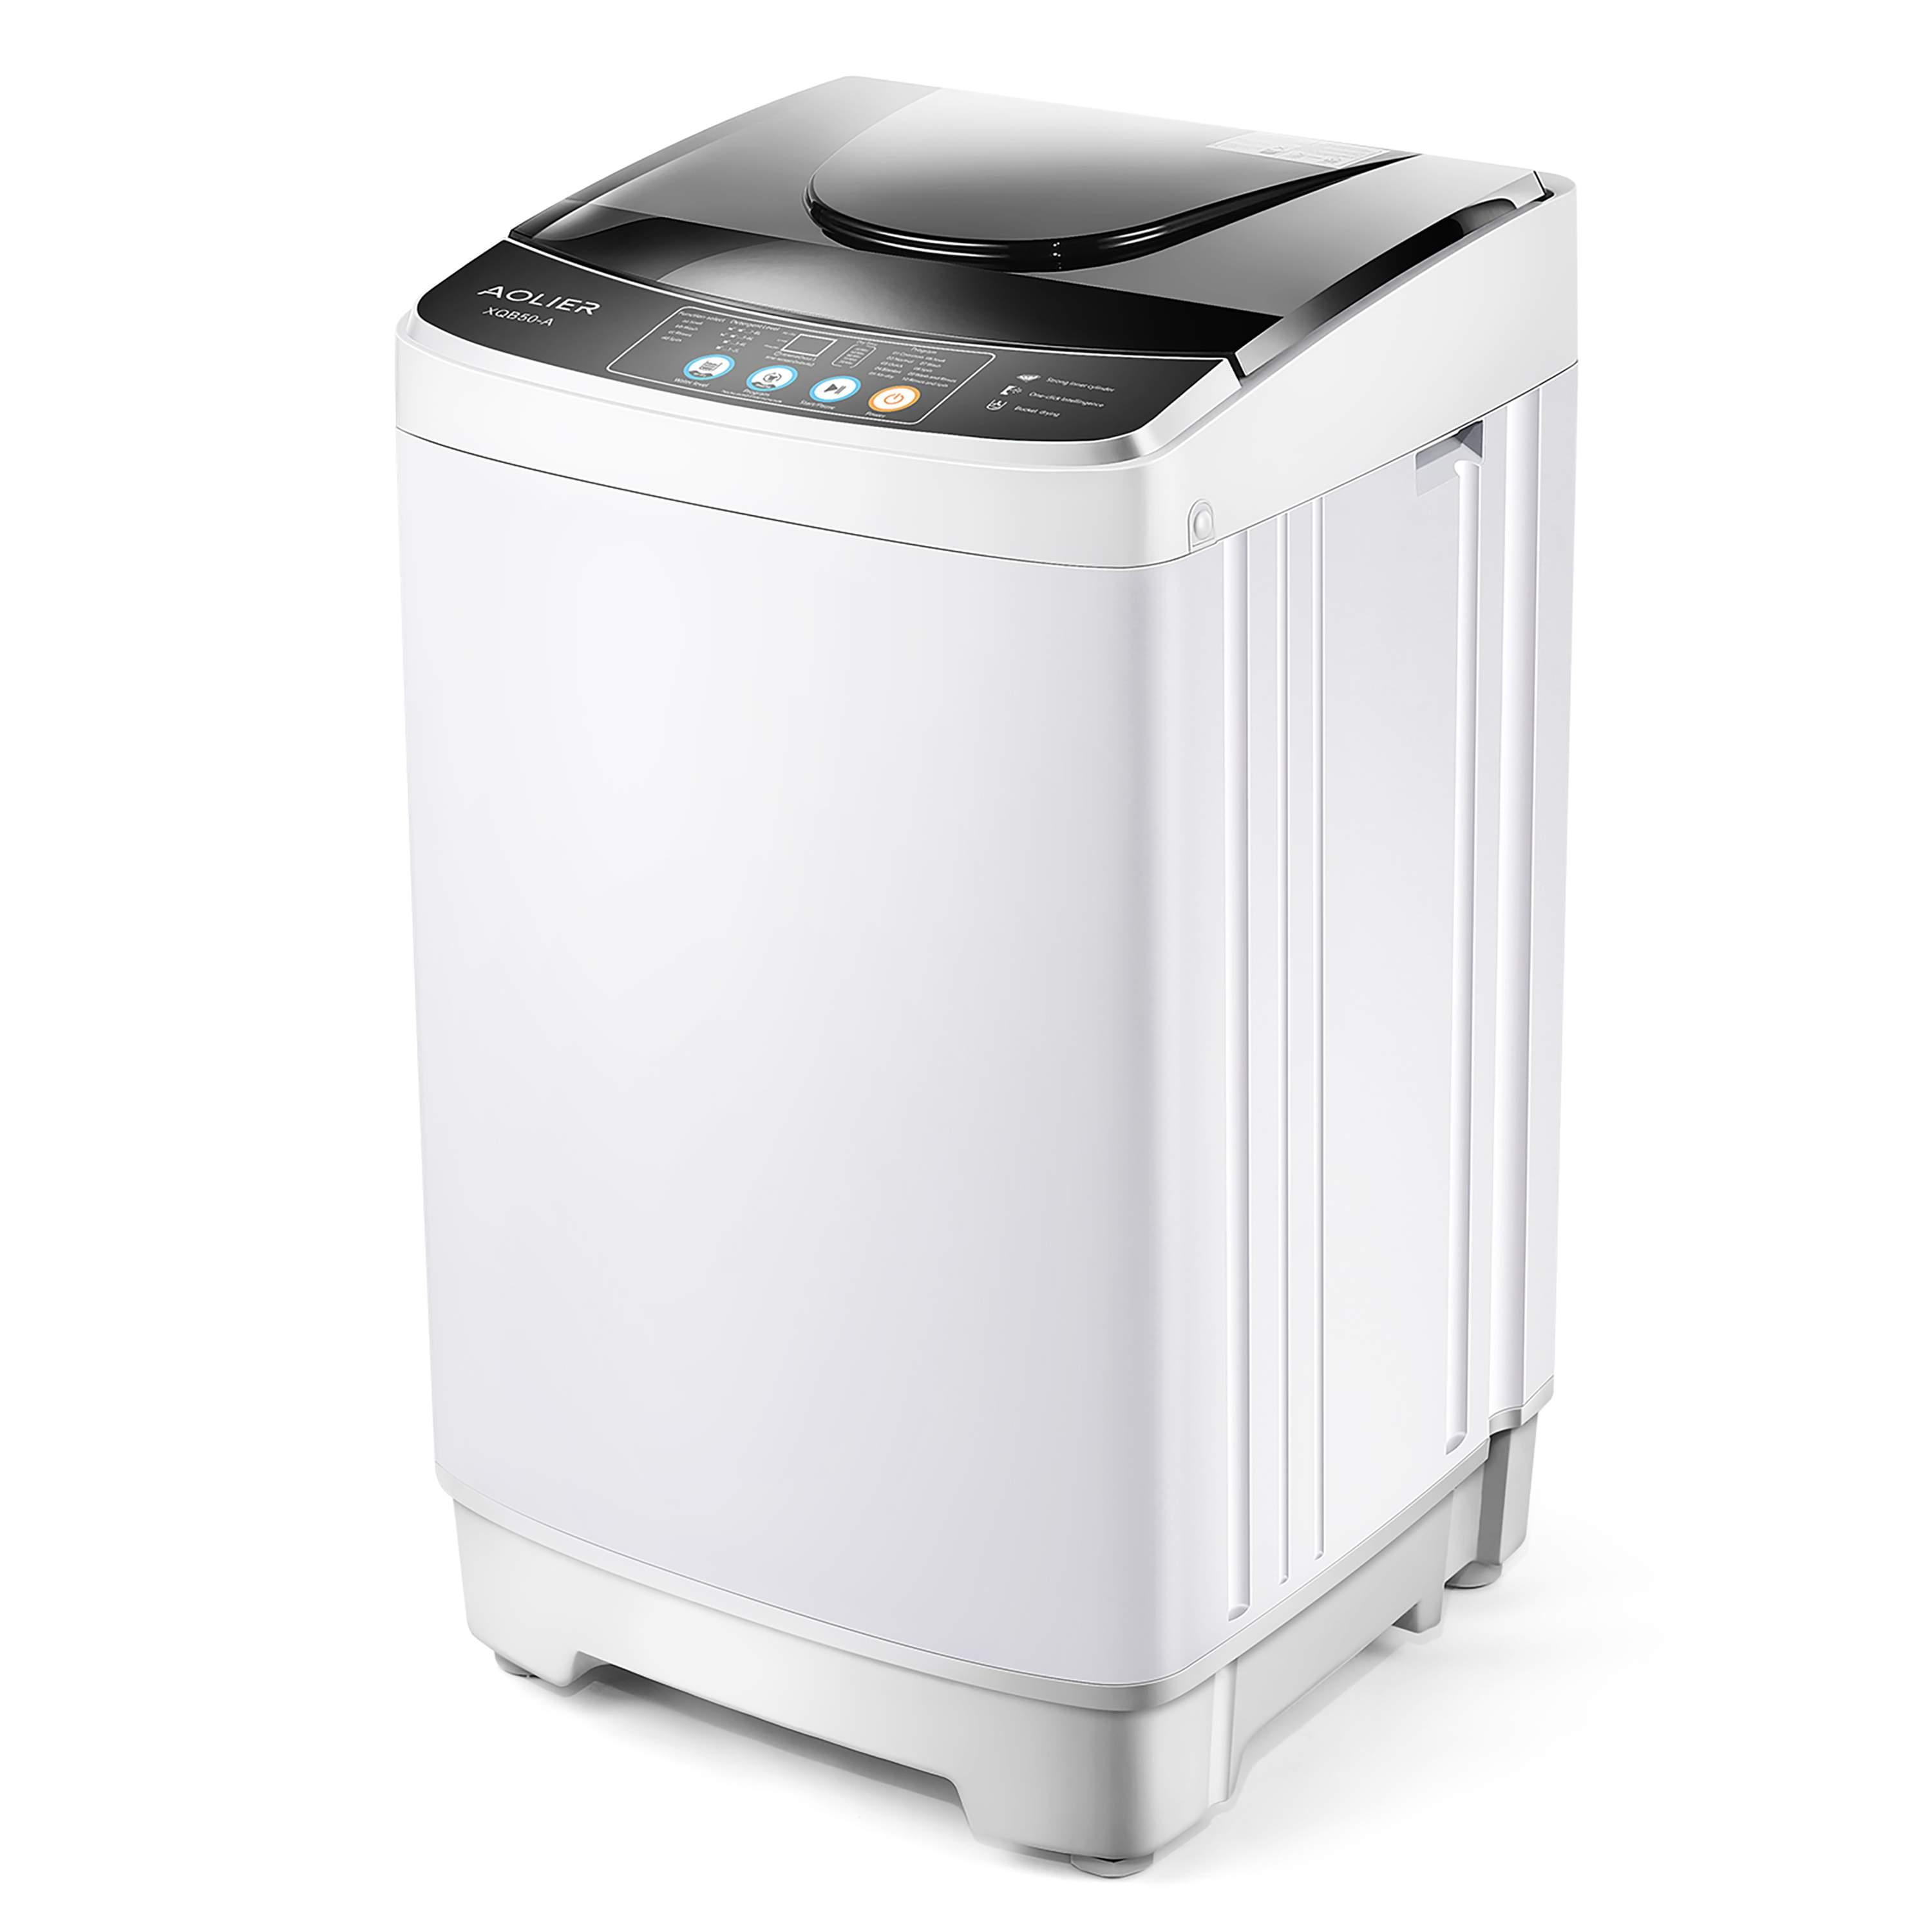 Portable Full-automatic Washing Machine Compact Powerful Washer Shock absorption 